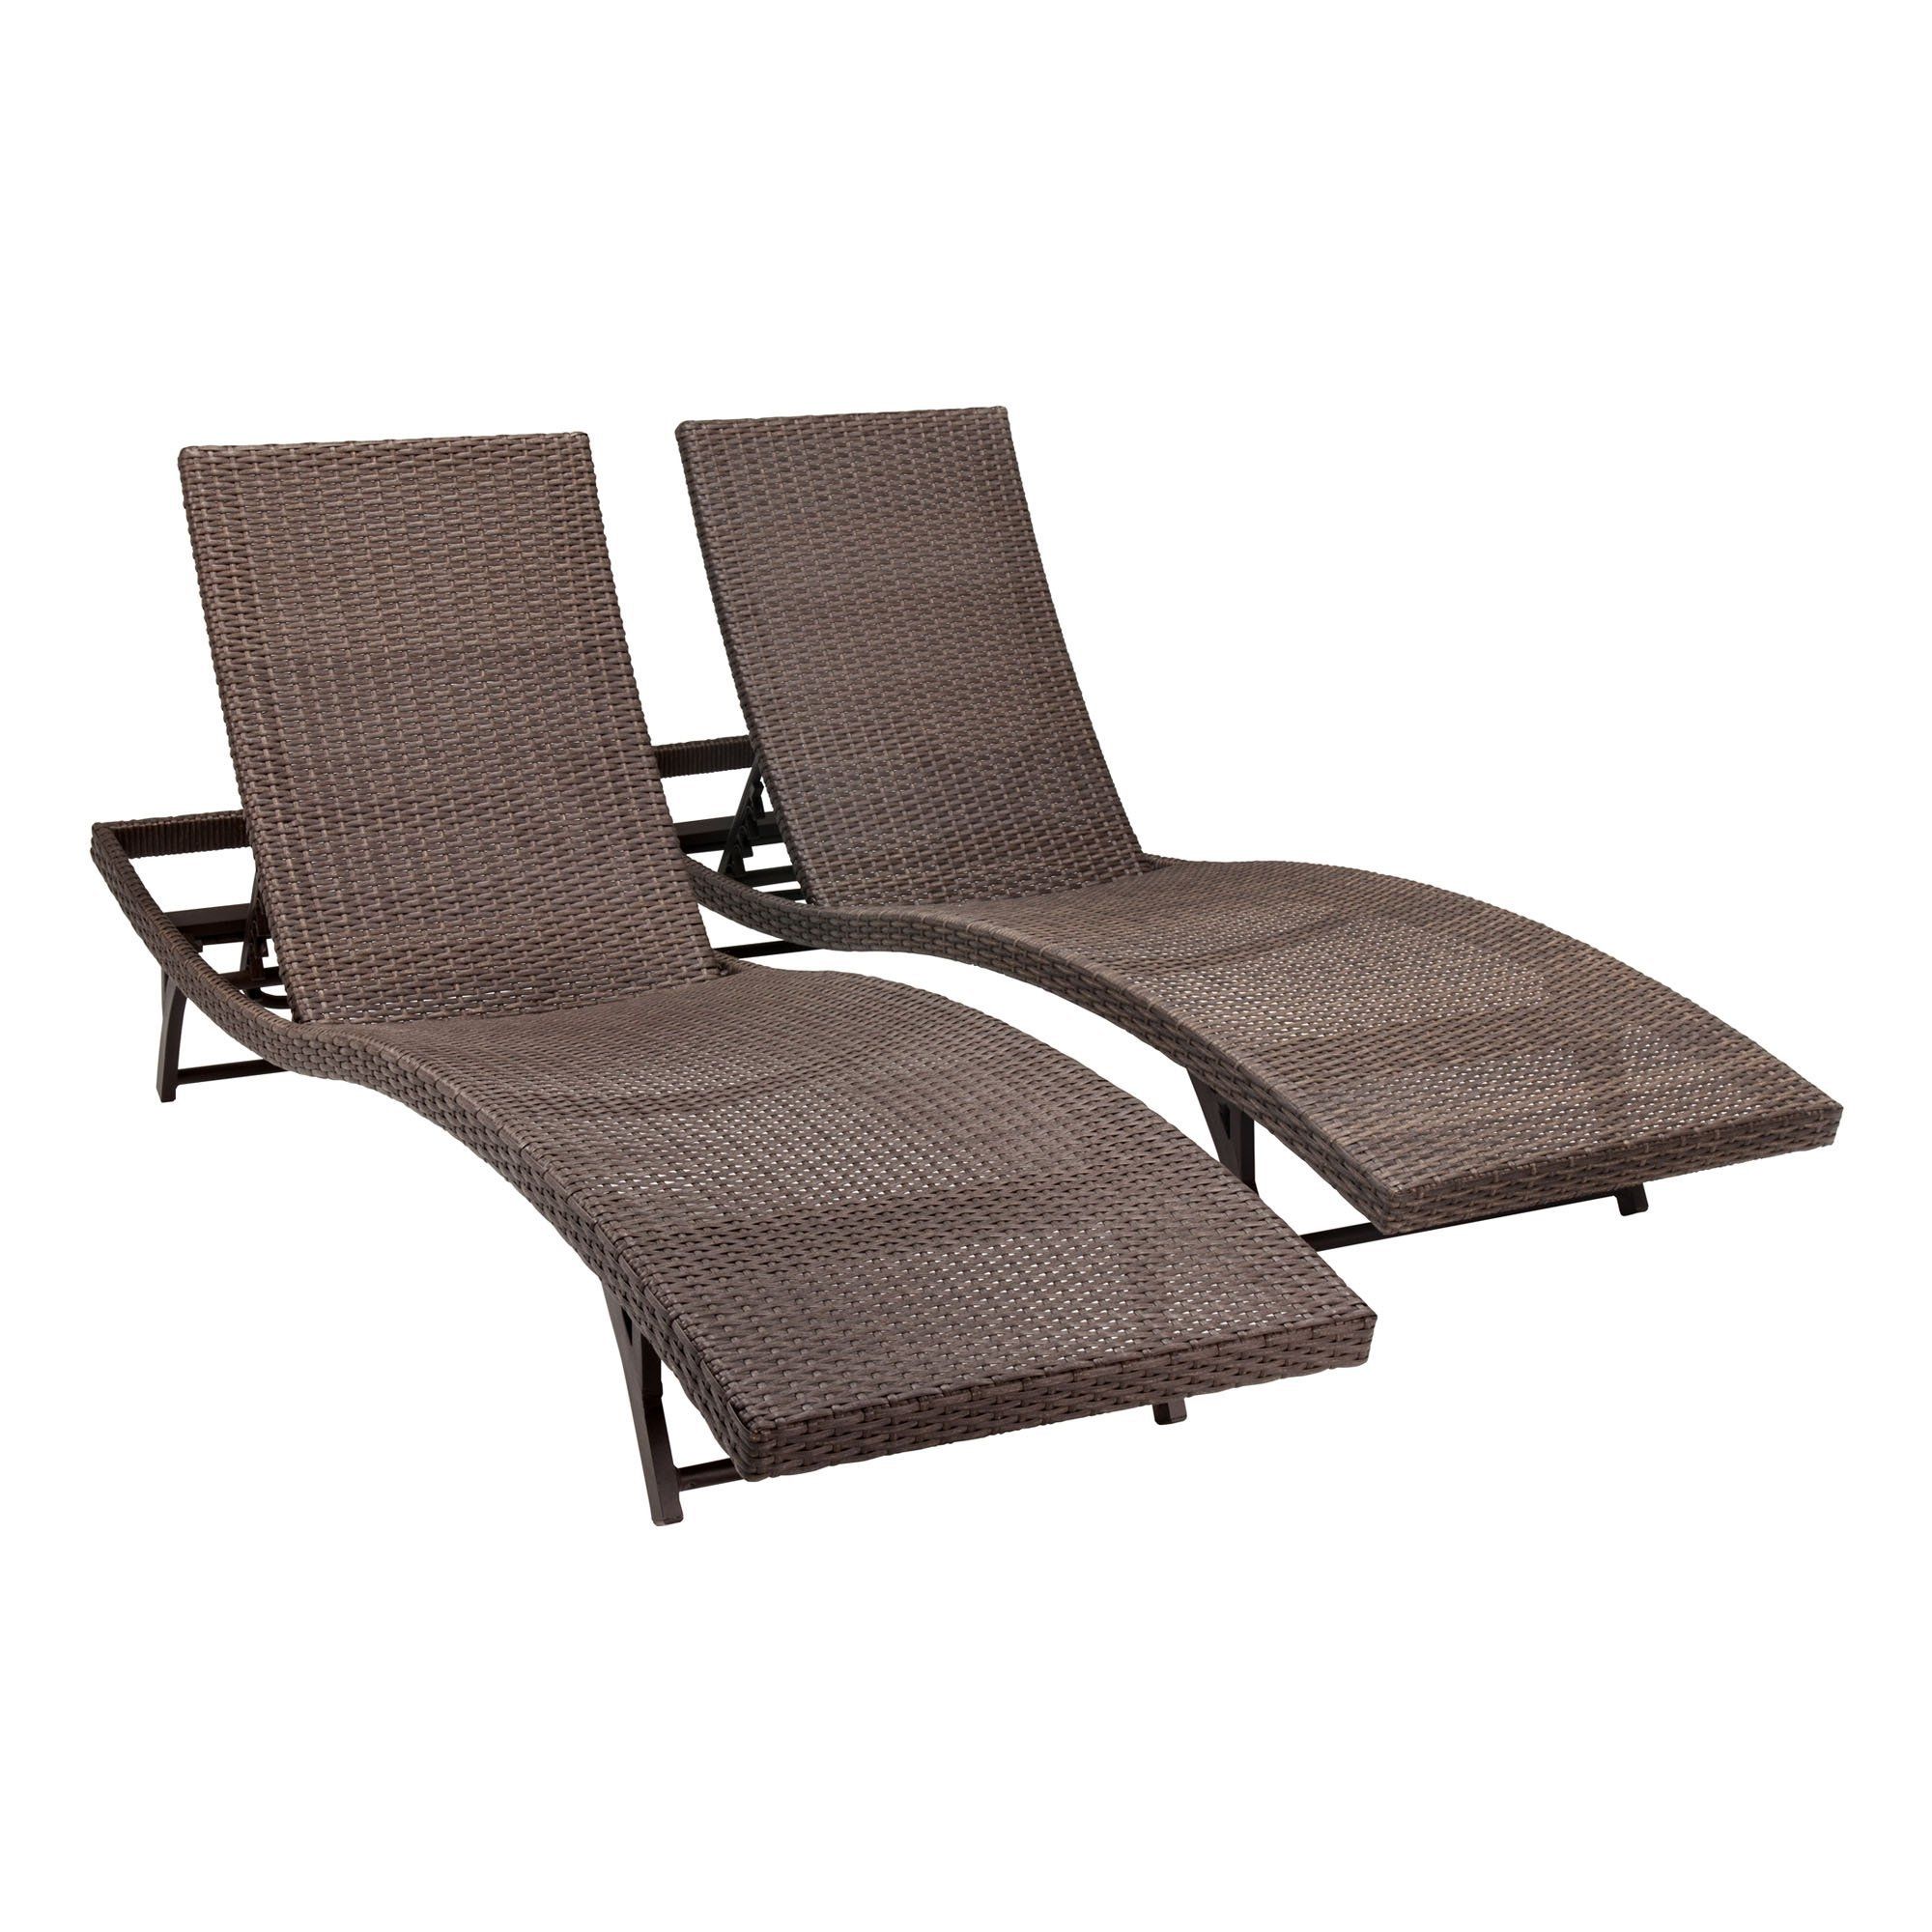 Recent Chaise Lounge Chairs For Outdoors Within Outdoor Chaise Lounge Chairs Ideas : Best Outdoor Chaise Lounge (View 9 of 15)